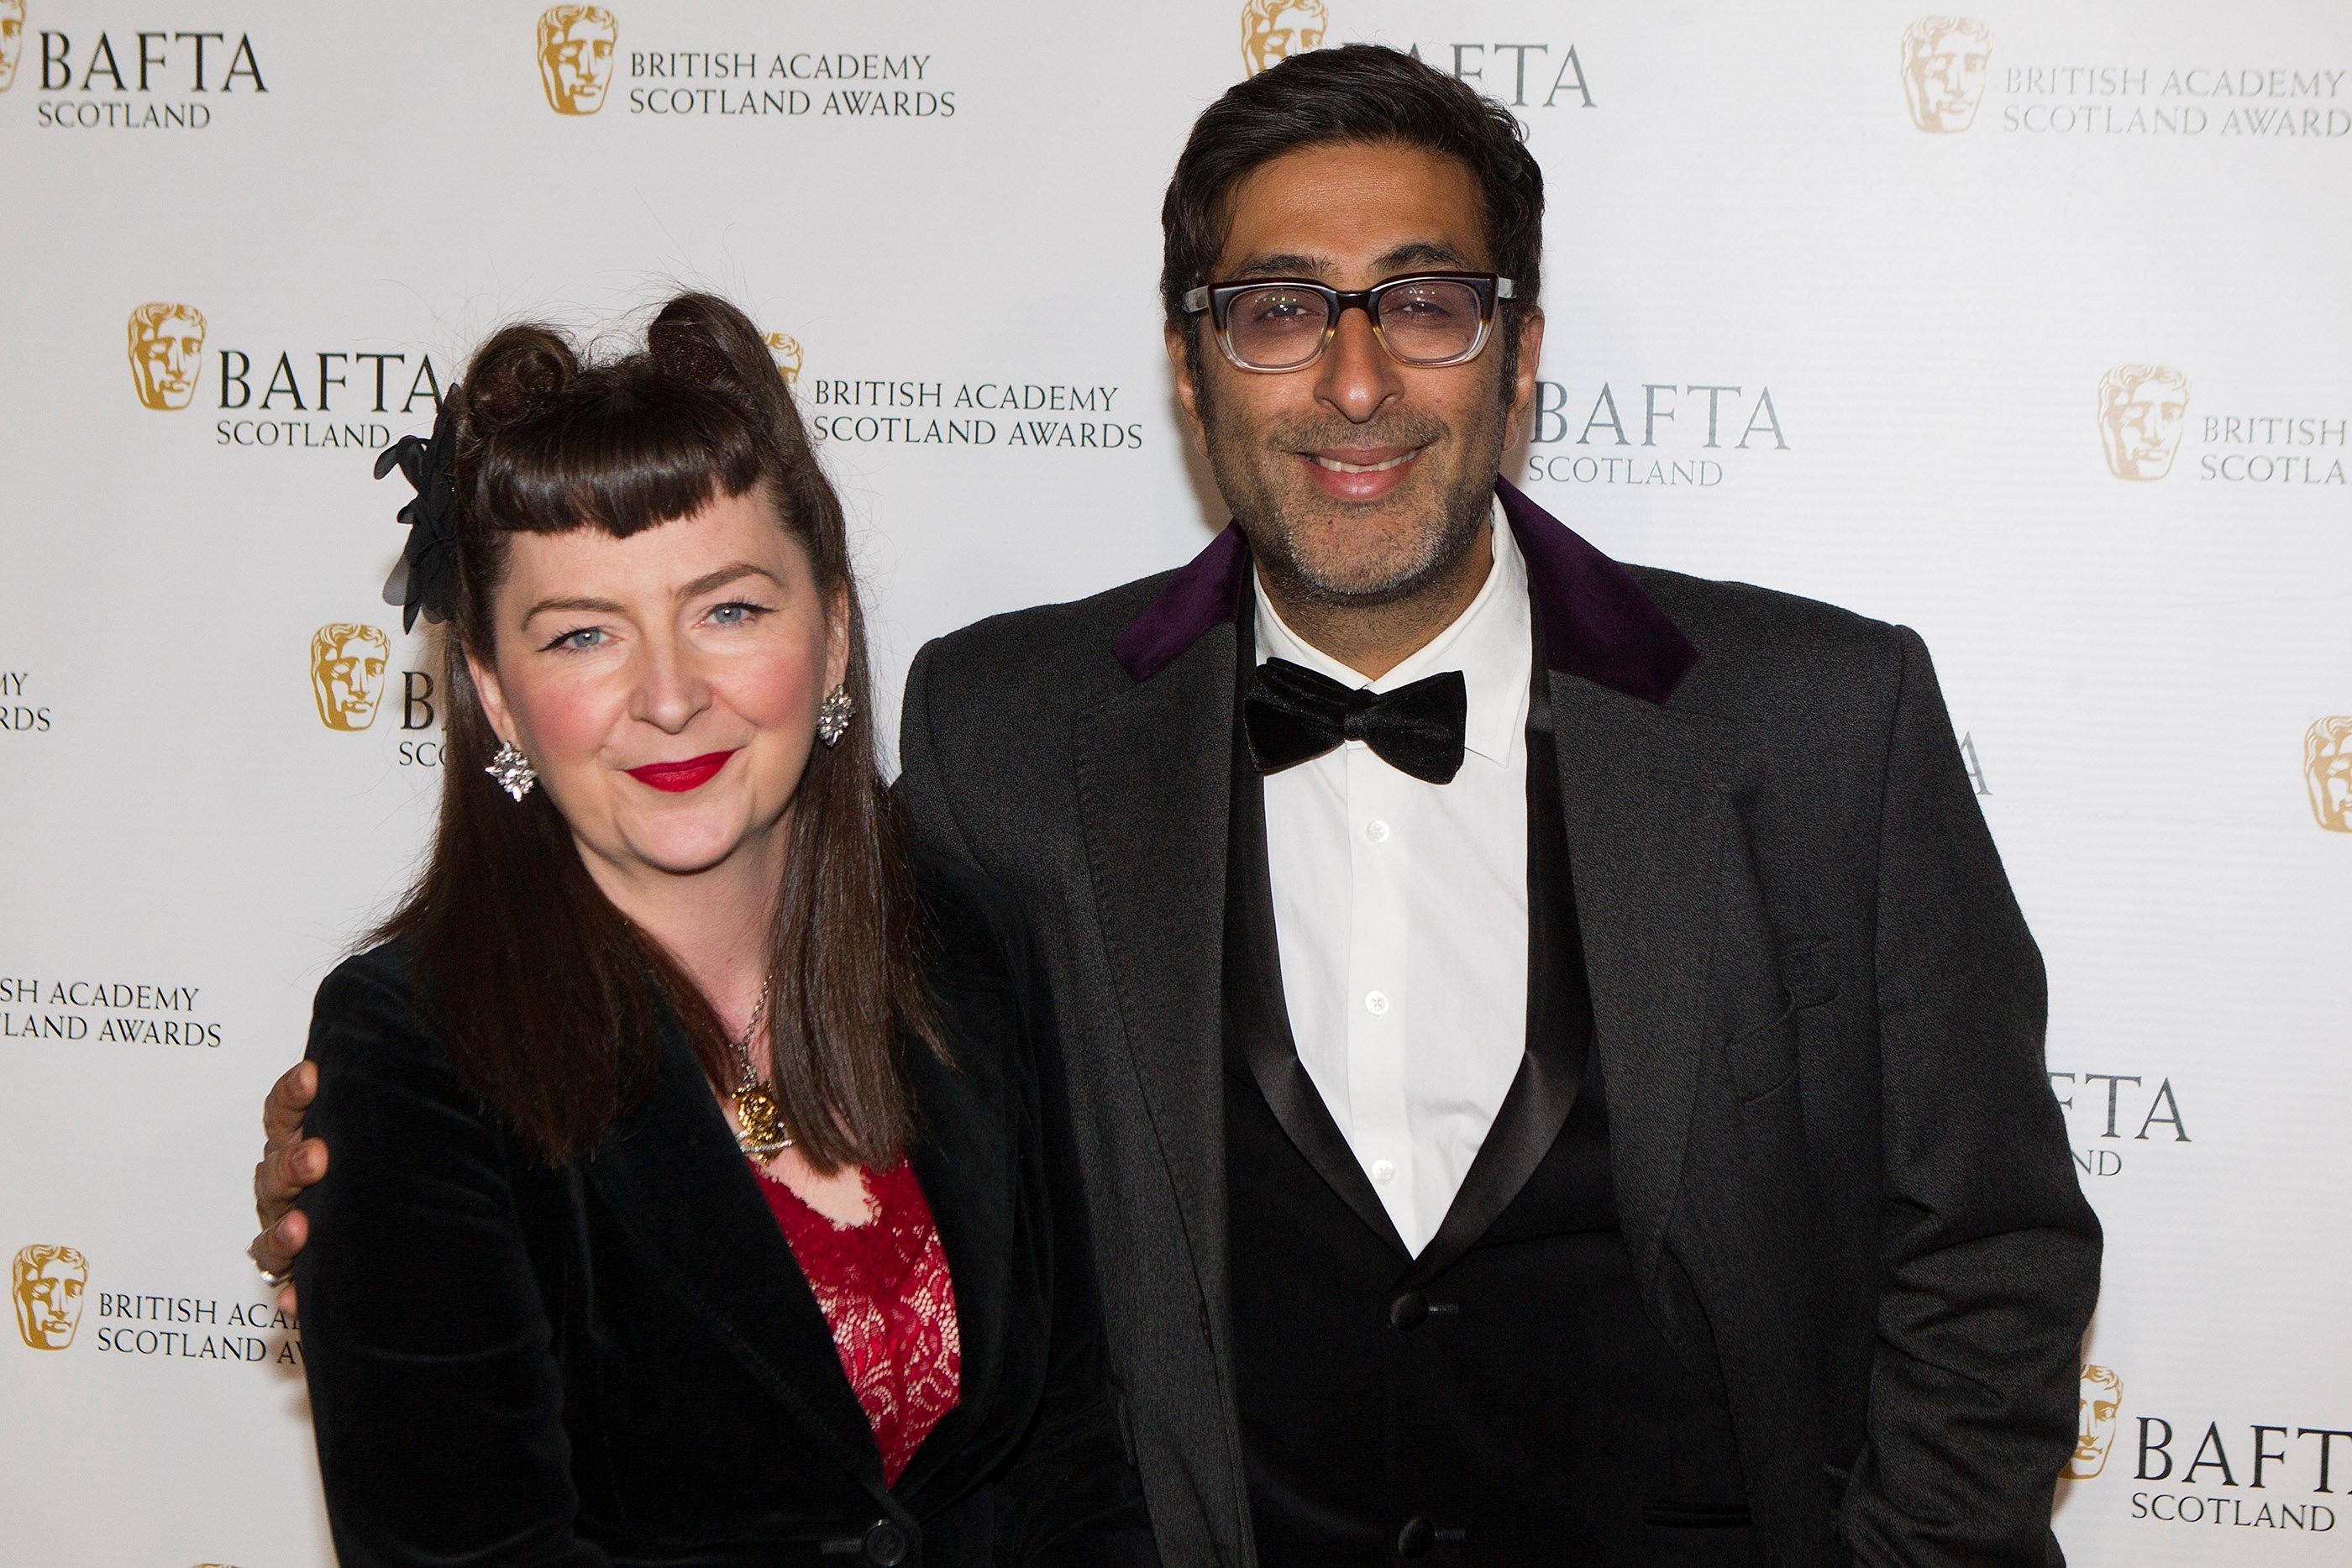 Sanjeev Kohli and wife Fiona on the red carpet at the BAFTA Scotland Awards held at the Radisson Blu, Glasgow. The awards honour the very best Scottish talent in film, television and video games industries. Nov 6 2016